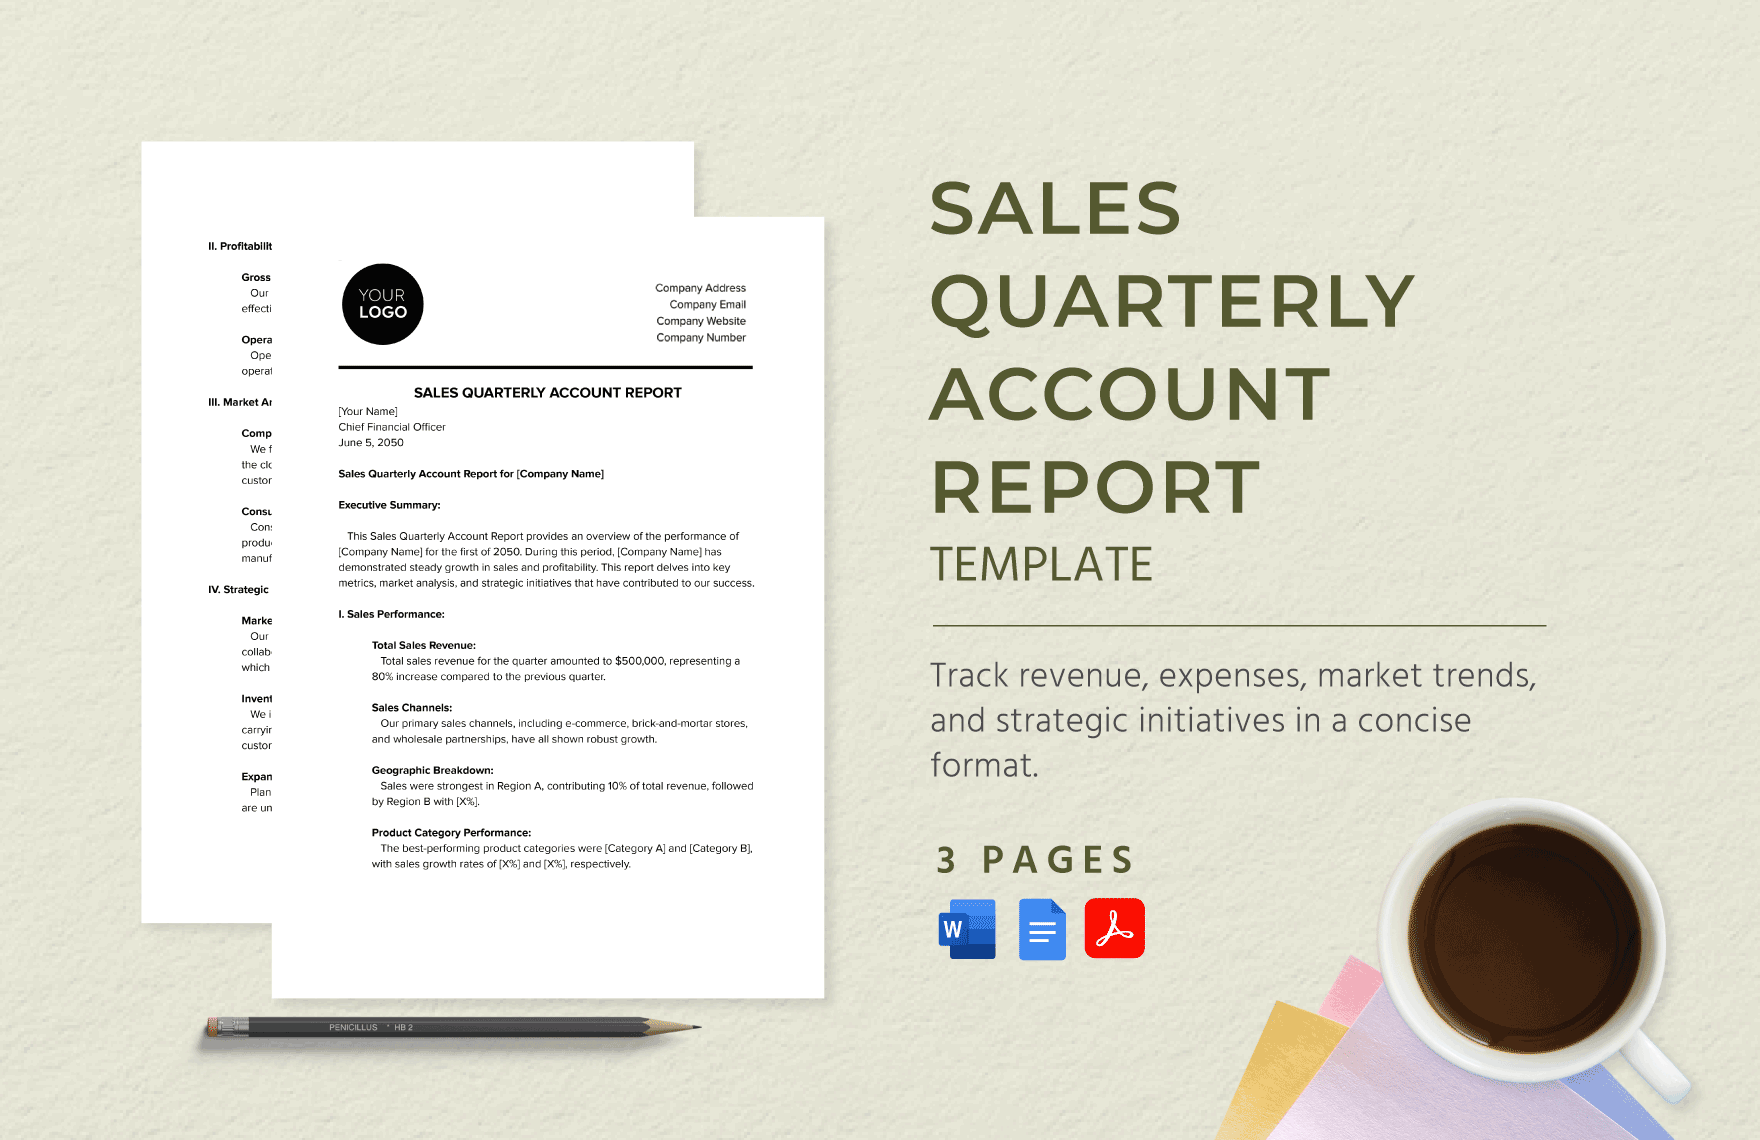 Sales Quarterly Account Report Template in Word, Google Docs, PDF